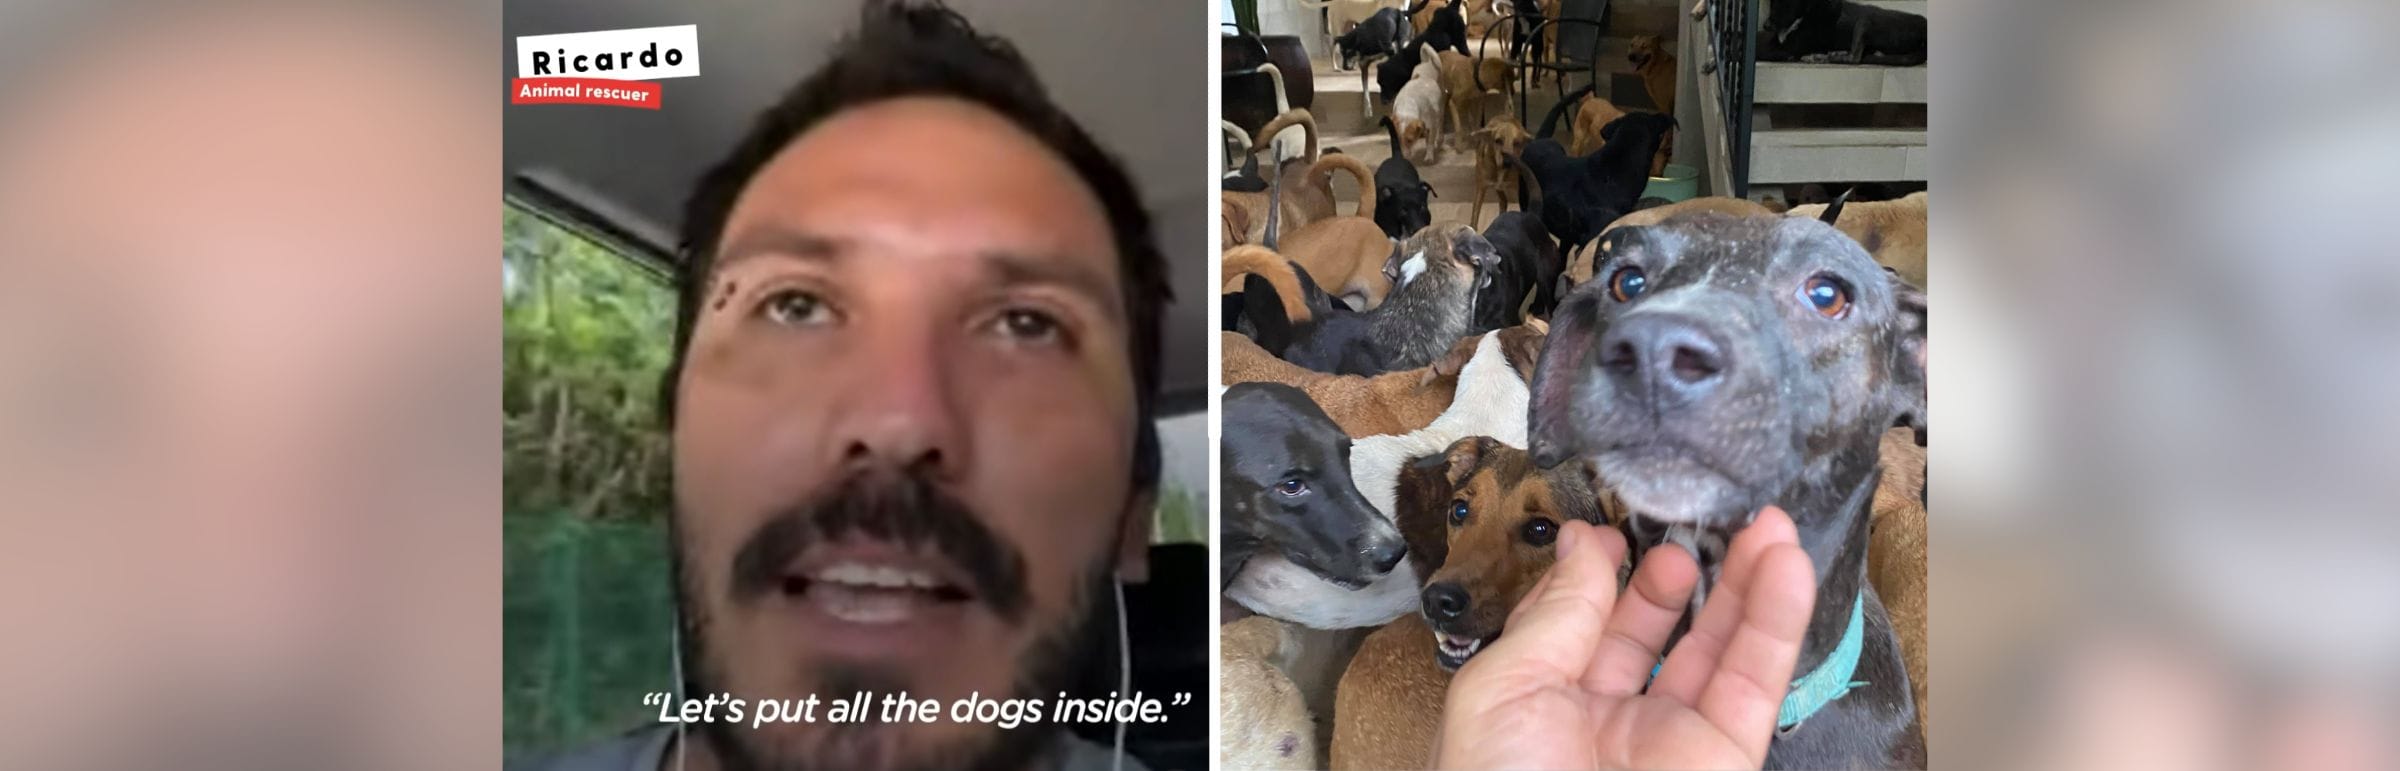 Man Welcomes 300 Dogs Into His Home to Protect Them From Hurricane